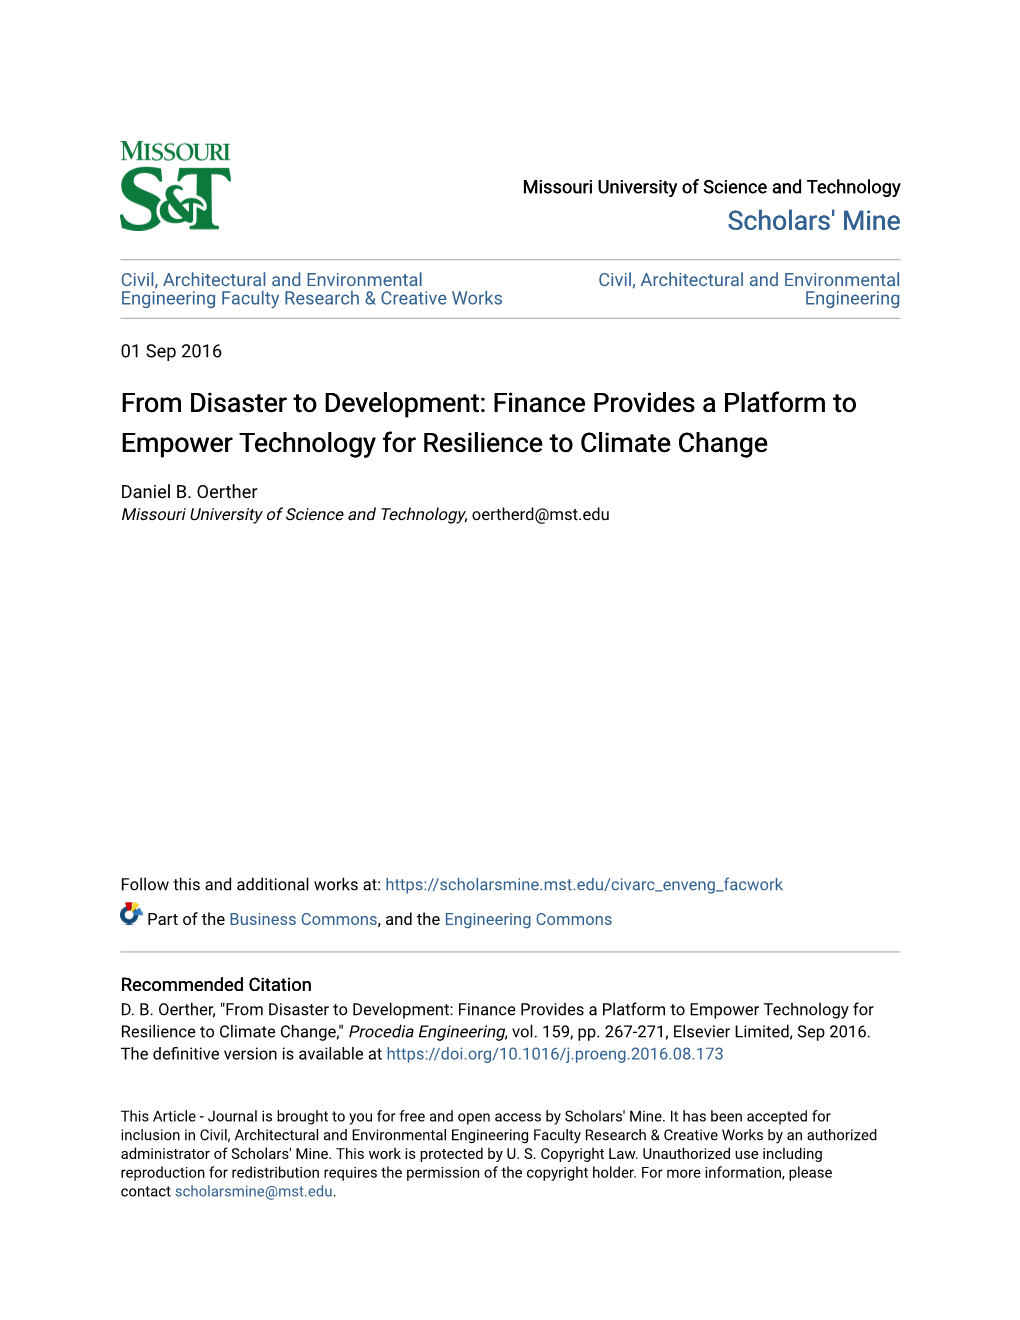 From Disaster to Development: Finance Provides a Platform to Empower Technology for Resilience to Climate Change